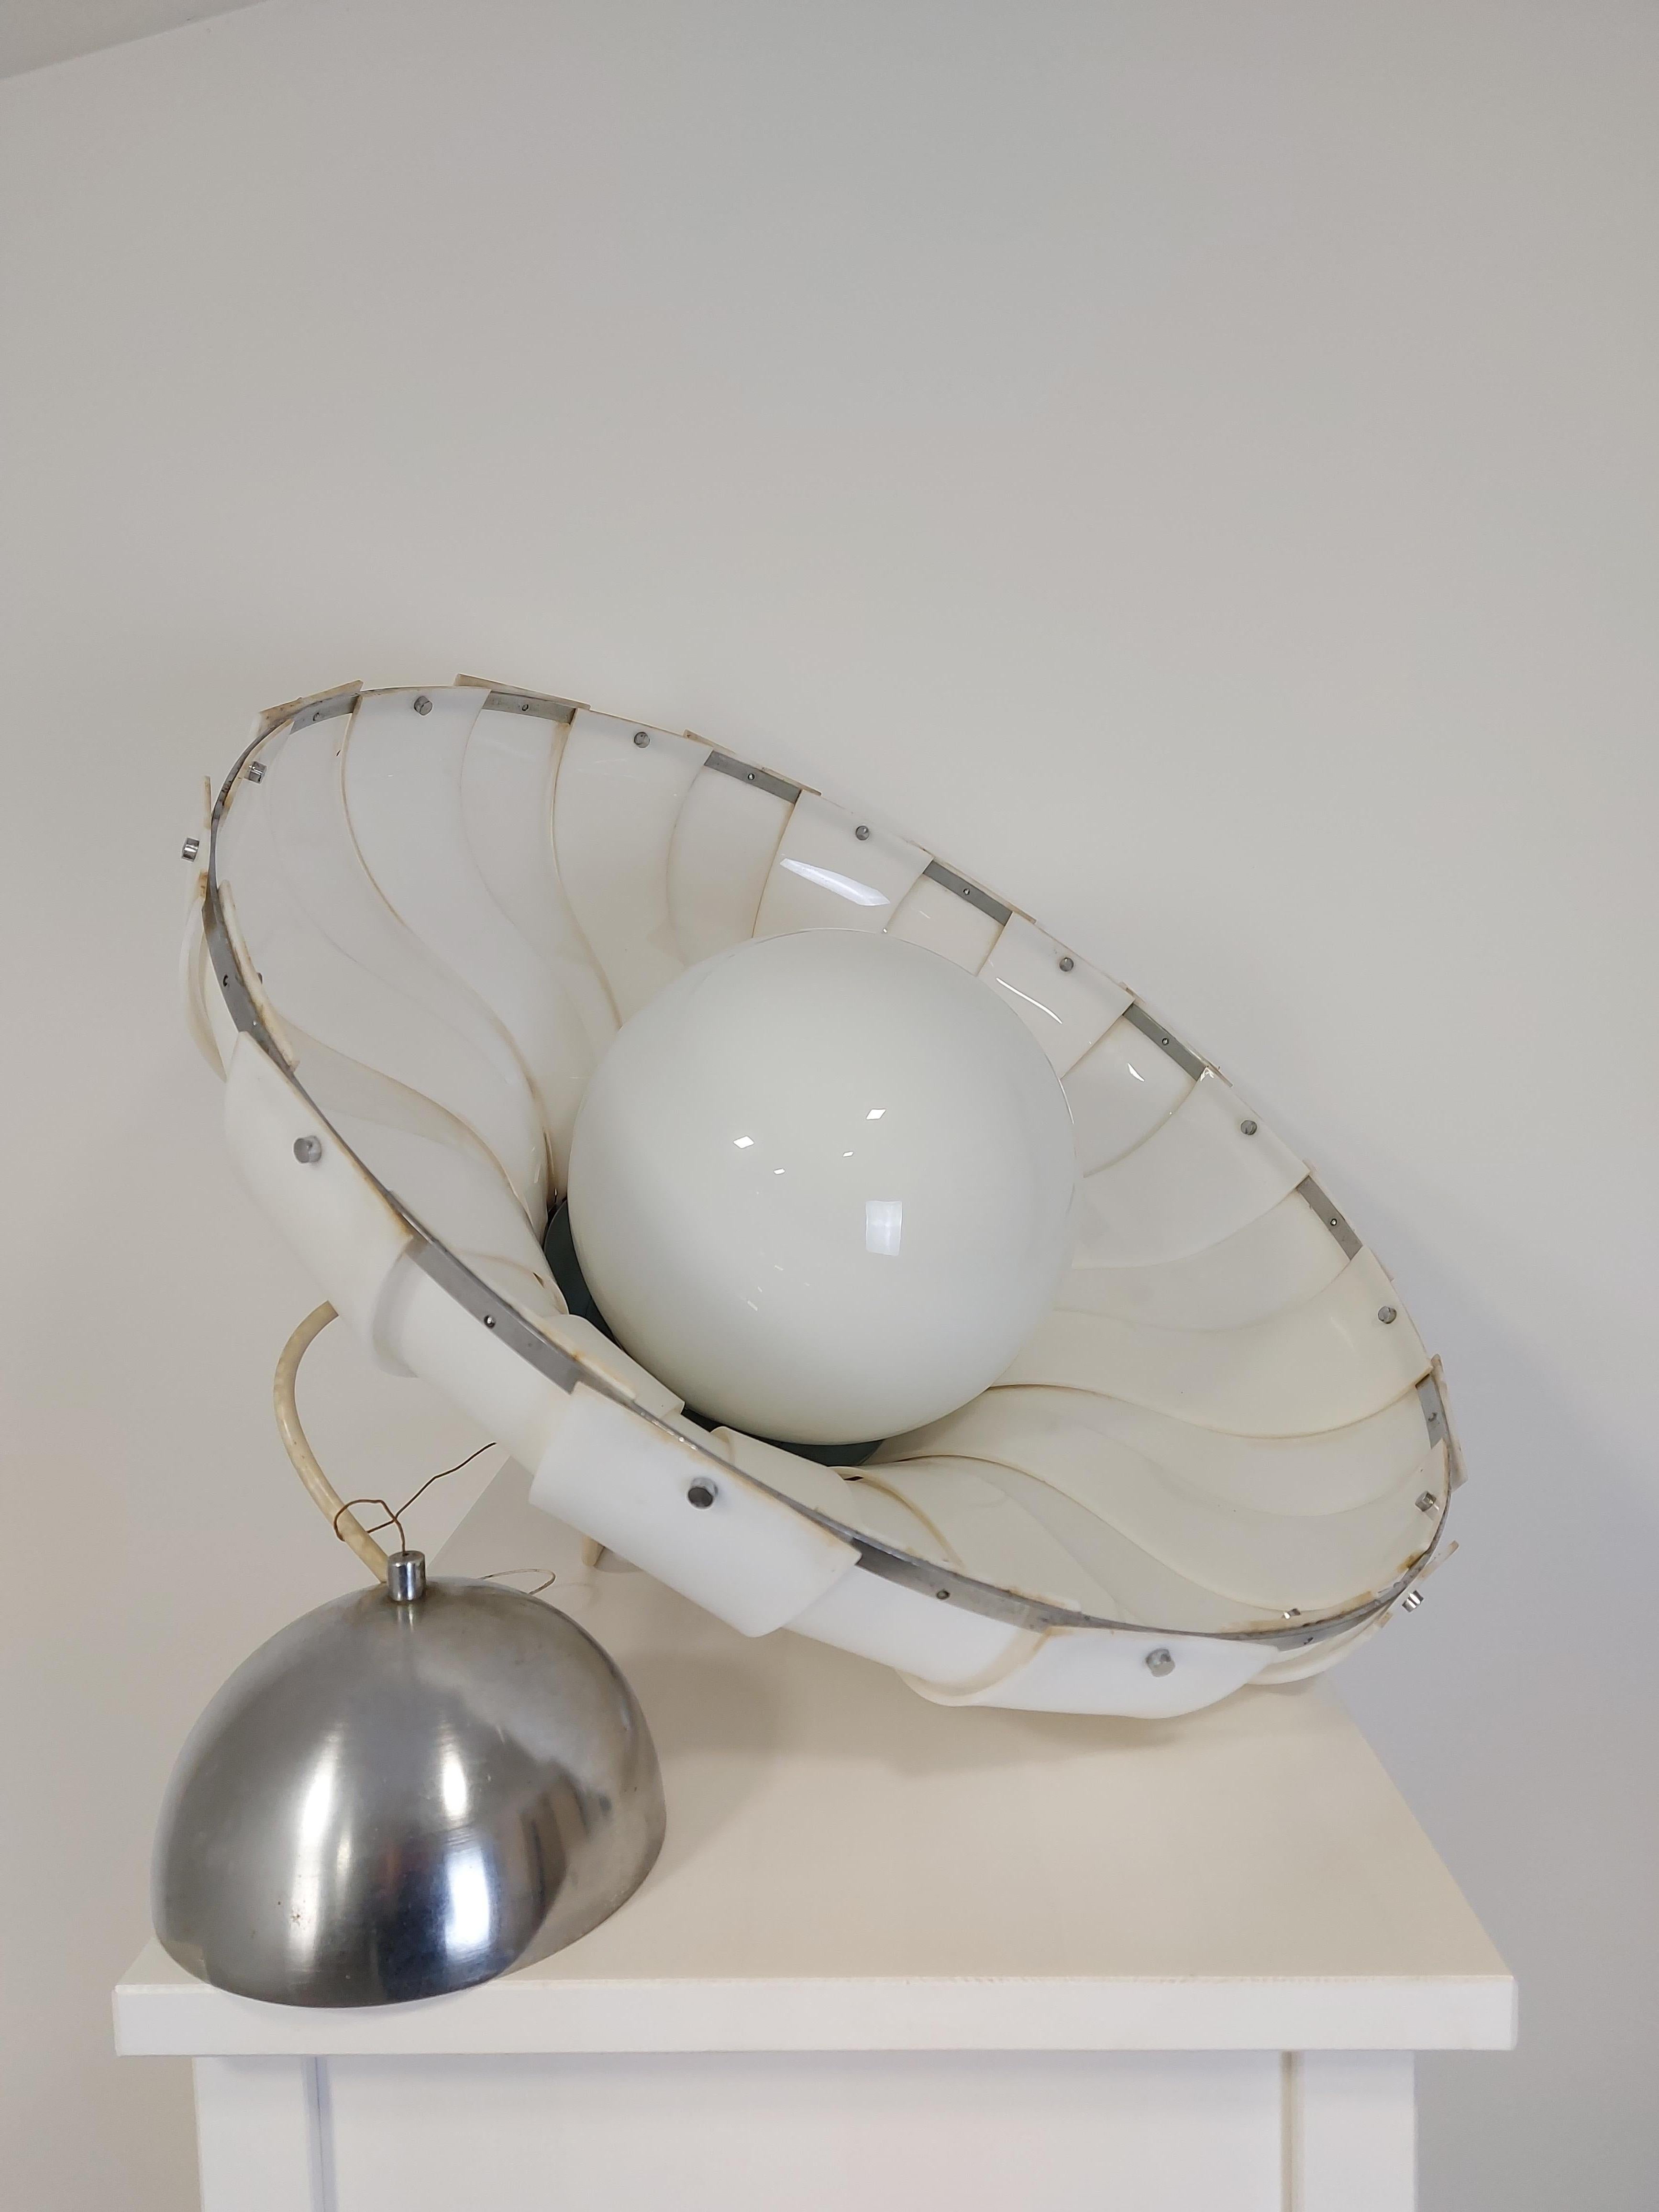 Space-age pendant '70s. Shade is made of chrome top, white ABS plastic and opaline globe.

It was produced in Meblo by Harvey Guzzini. The two studios used to partner in production and sales with collaborative branding during their prime